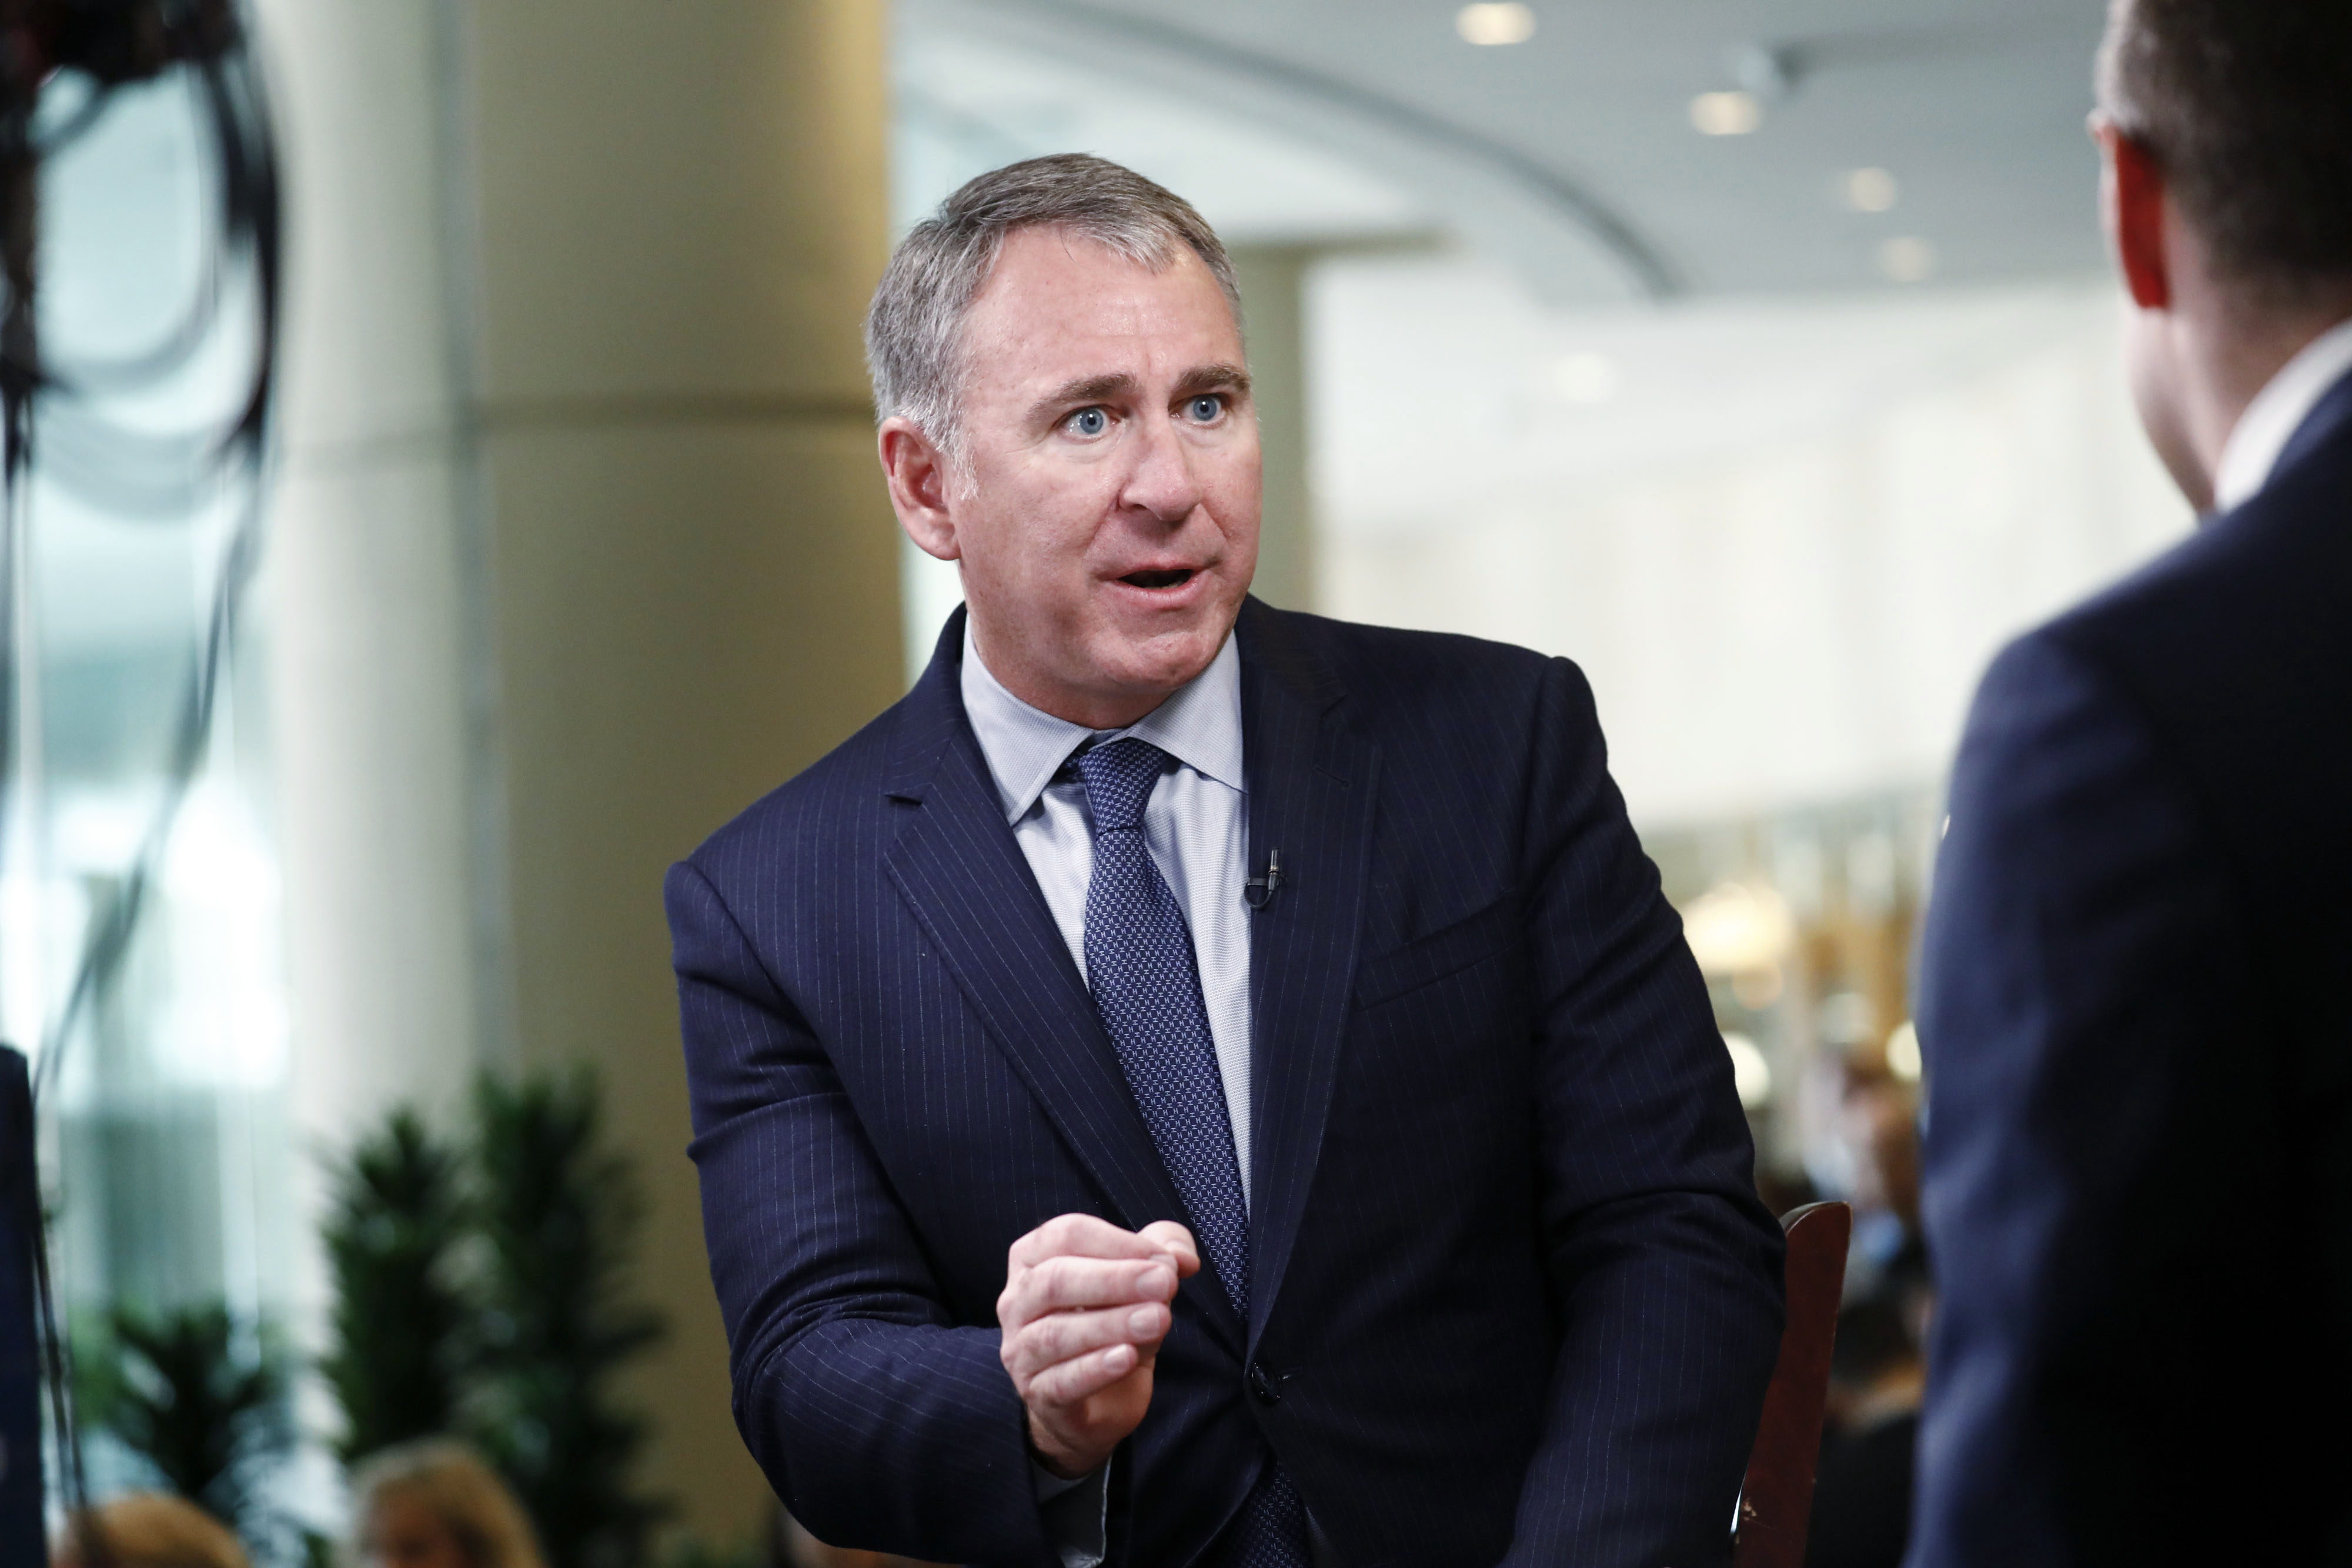 Illinois Governor Debate Schedule 2022 Ken Griffin Gives $20 Million To Republican In Illinois Governor Race -  Bloomberg